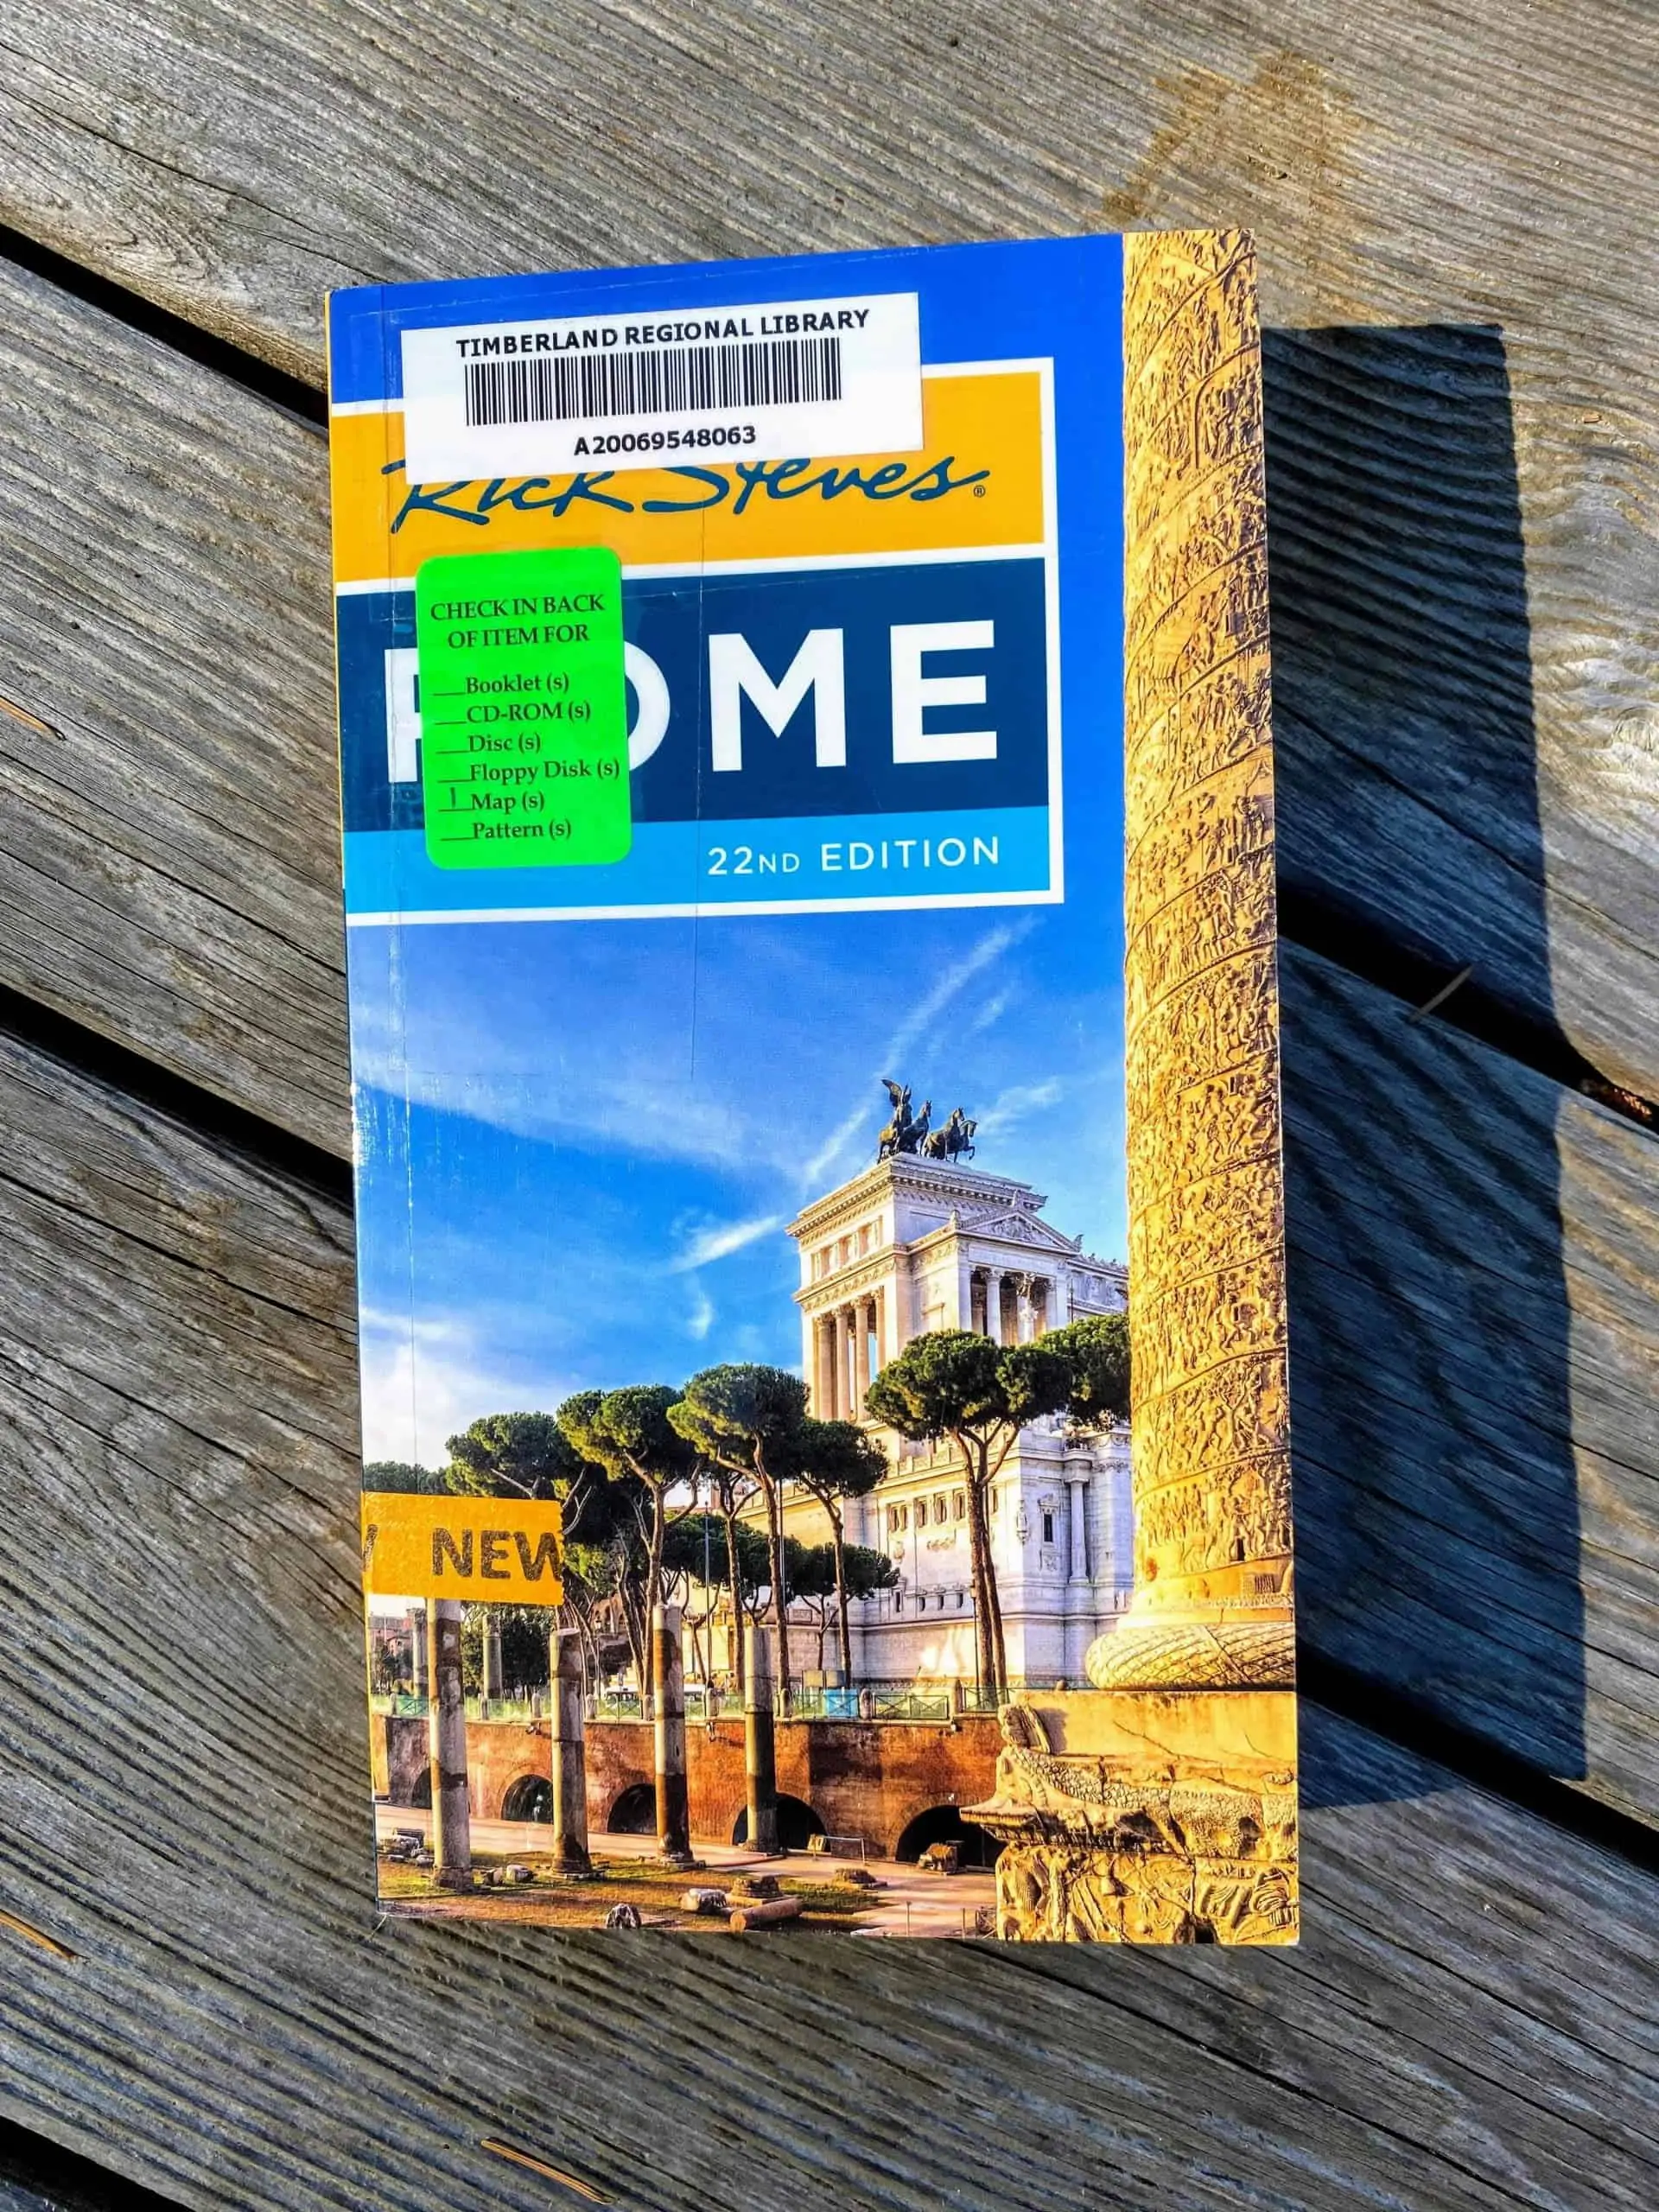 Library copy of Rick Steve's Rome guidebook with a wooden deck background.